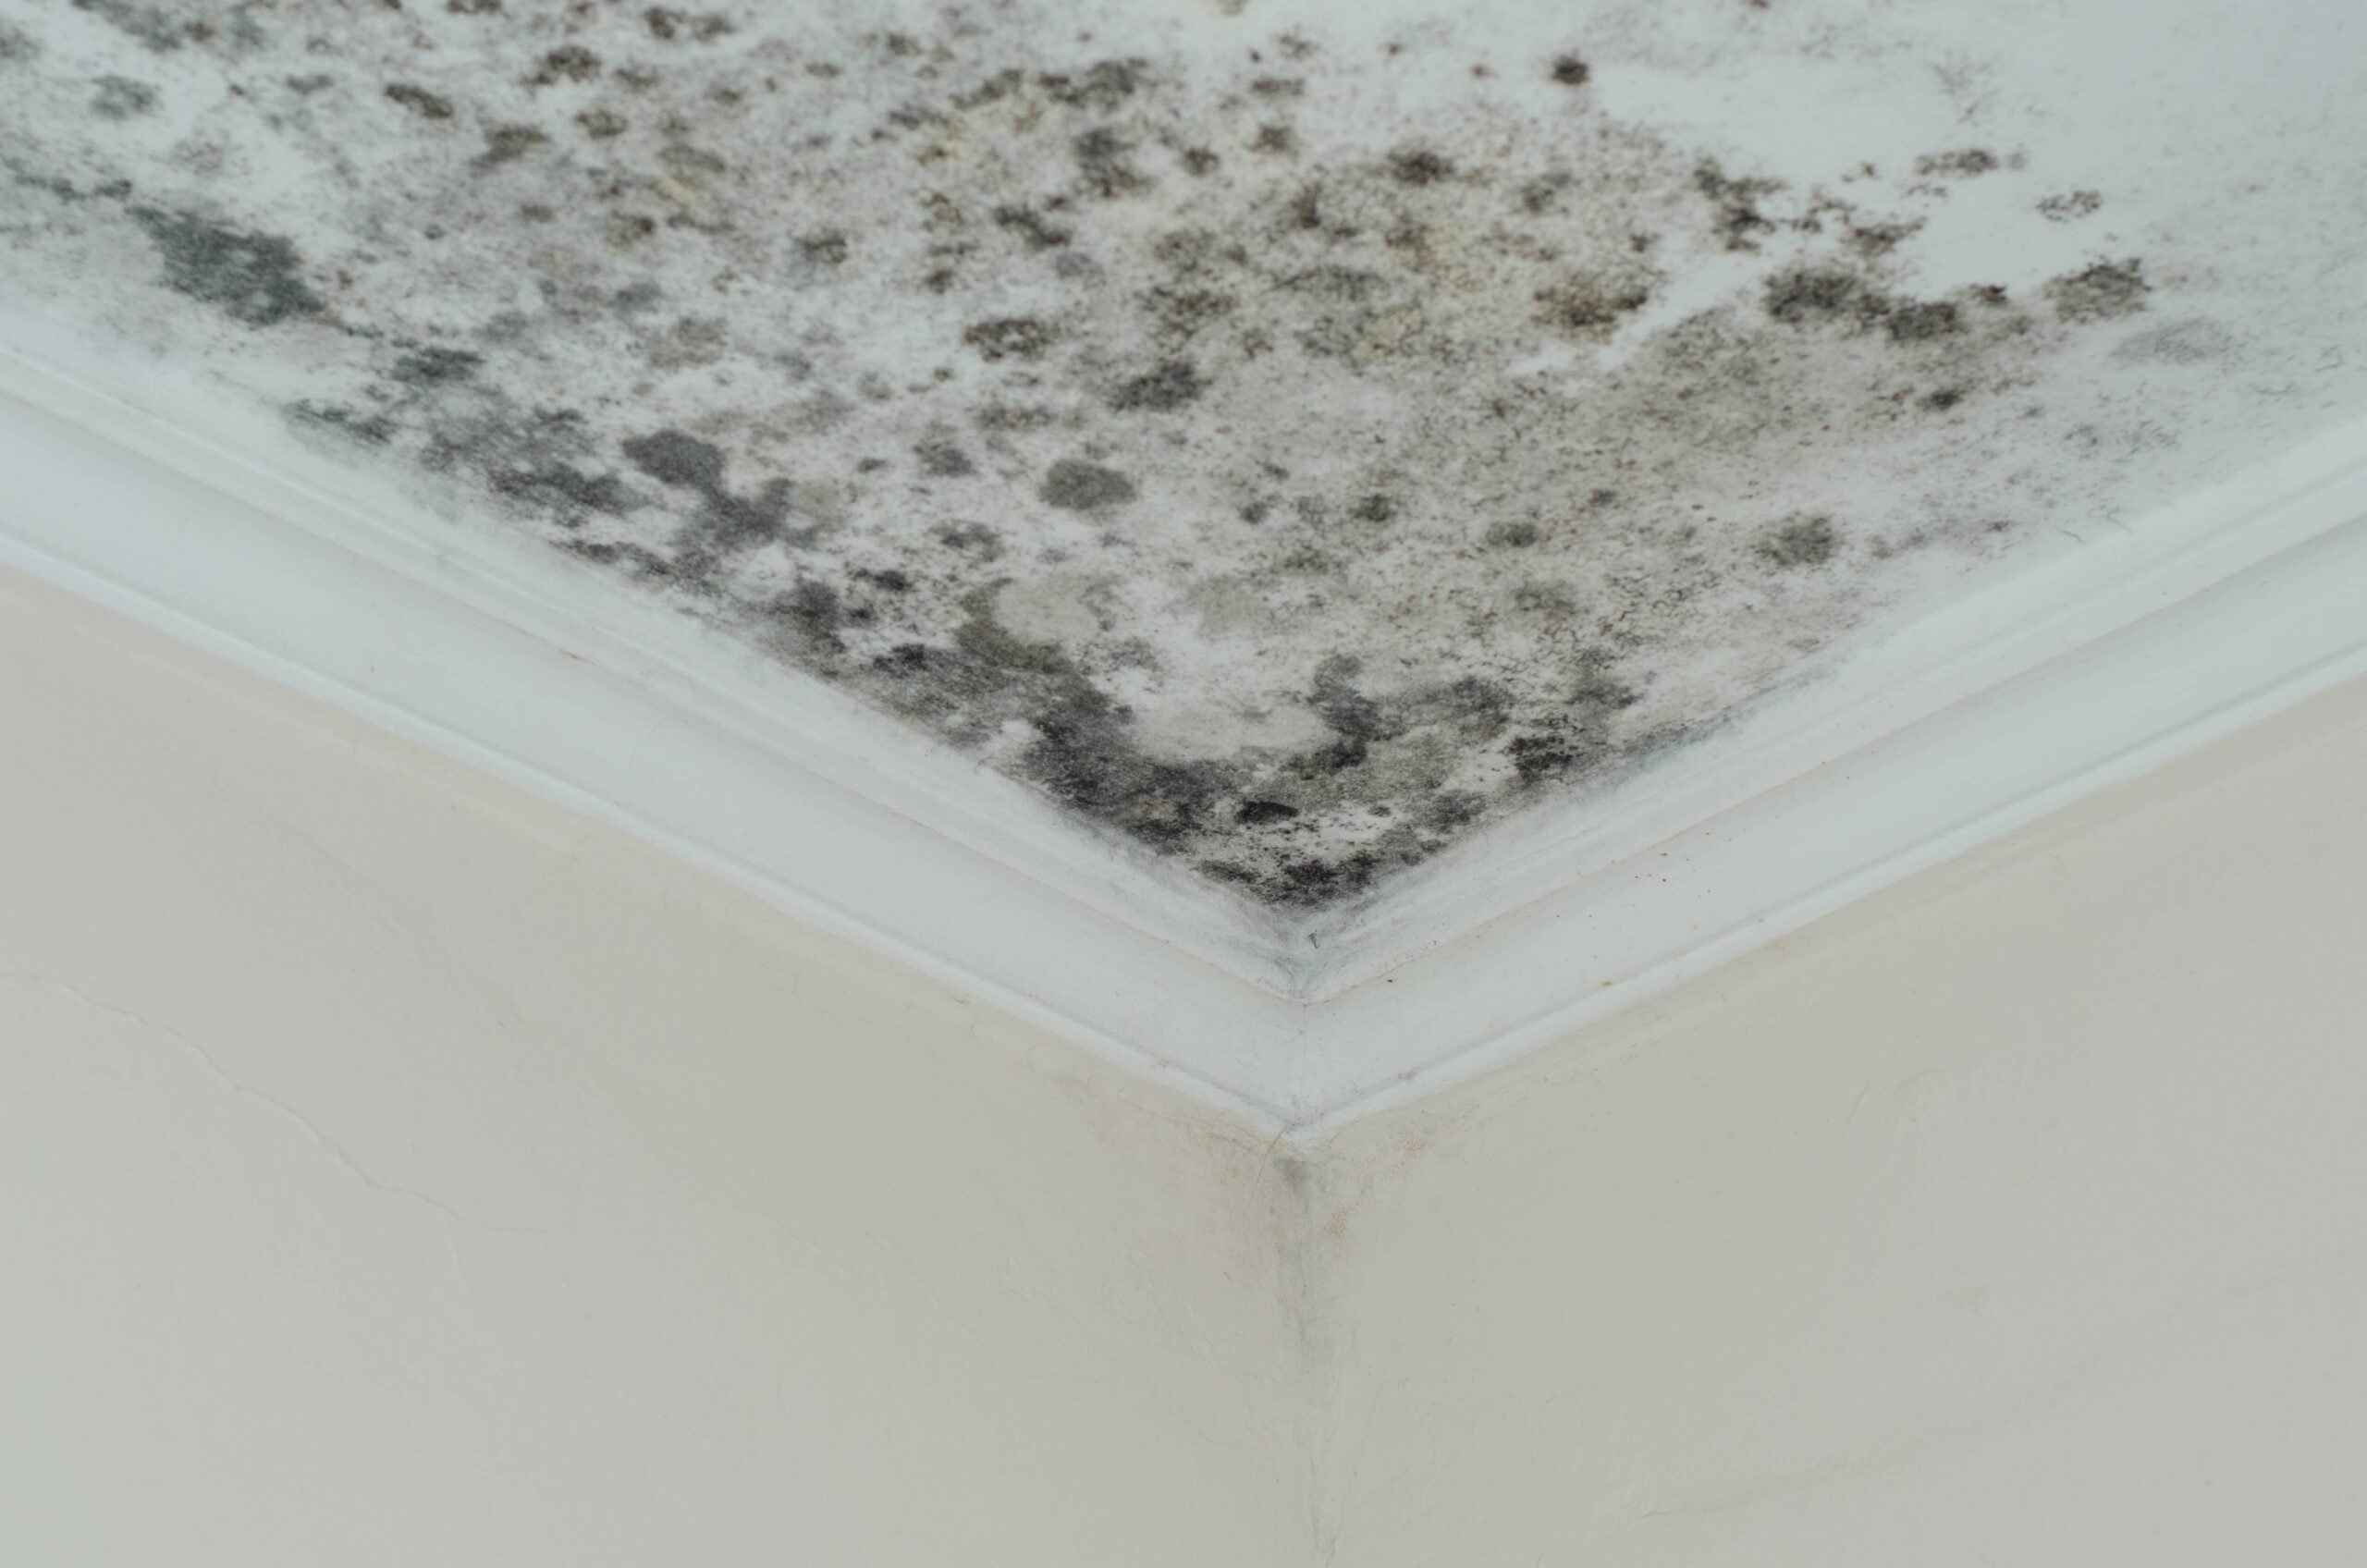 Problems With Mold? Don't Forget to Clean Your Air Ducts!